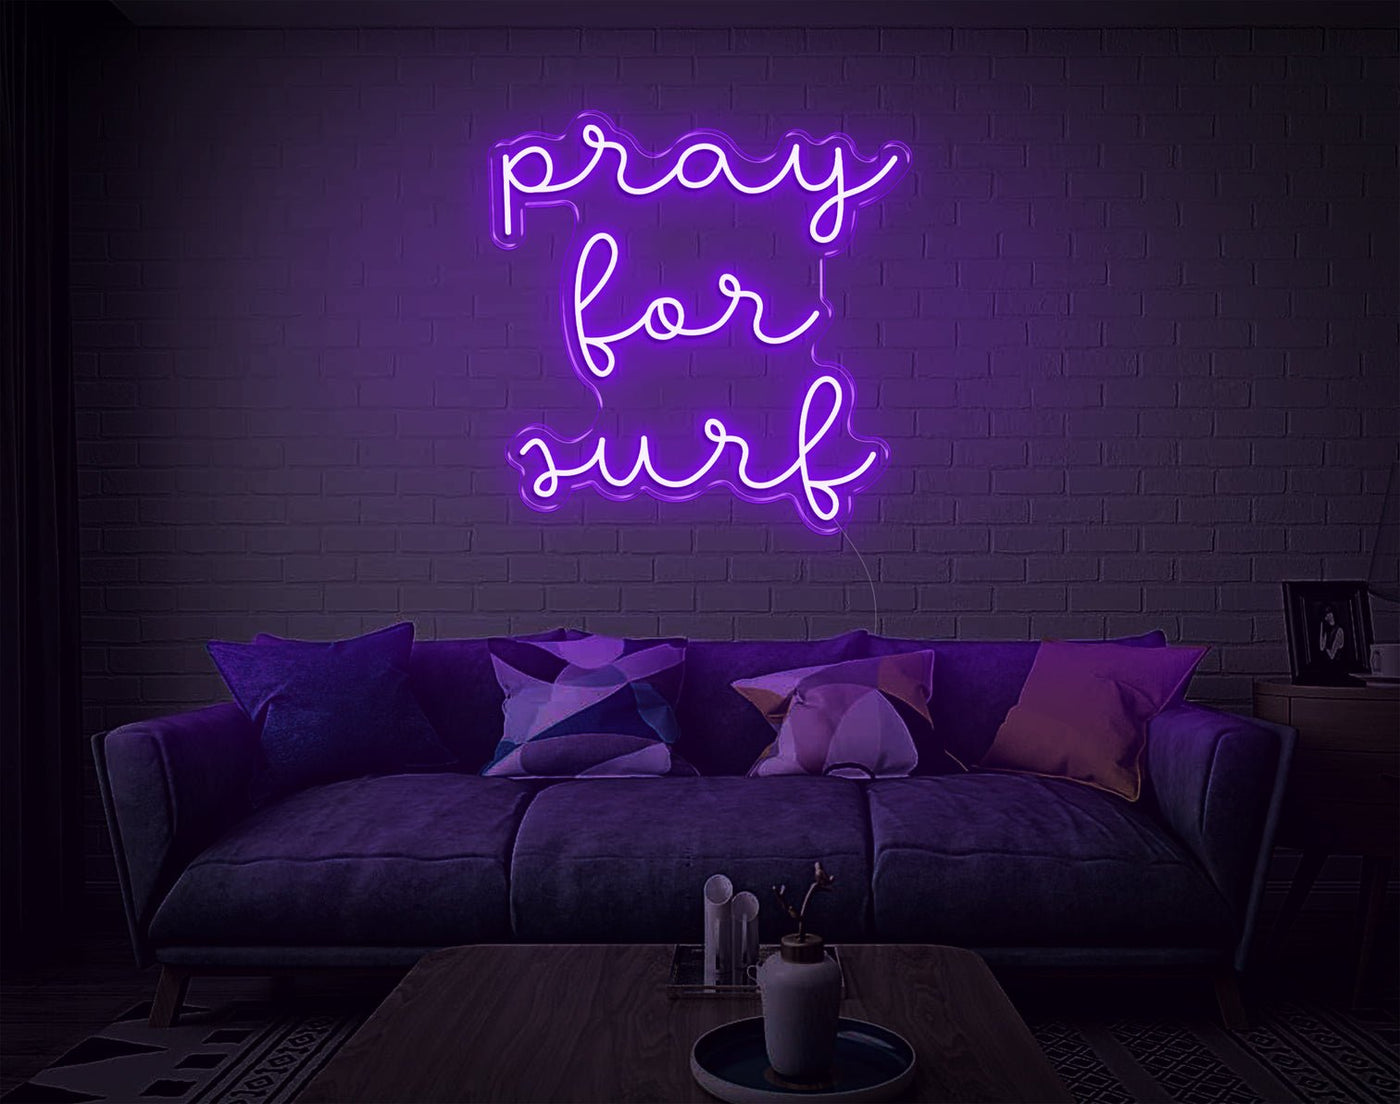 Pray For Surf LED Neon Sign - 24inch x 24inchHot Pink